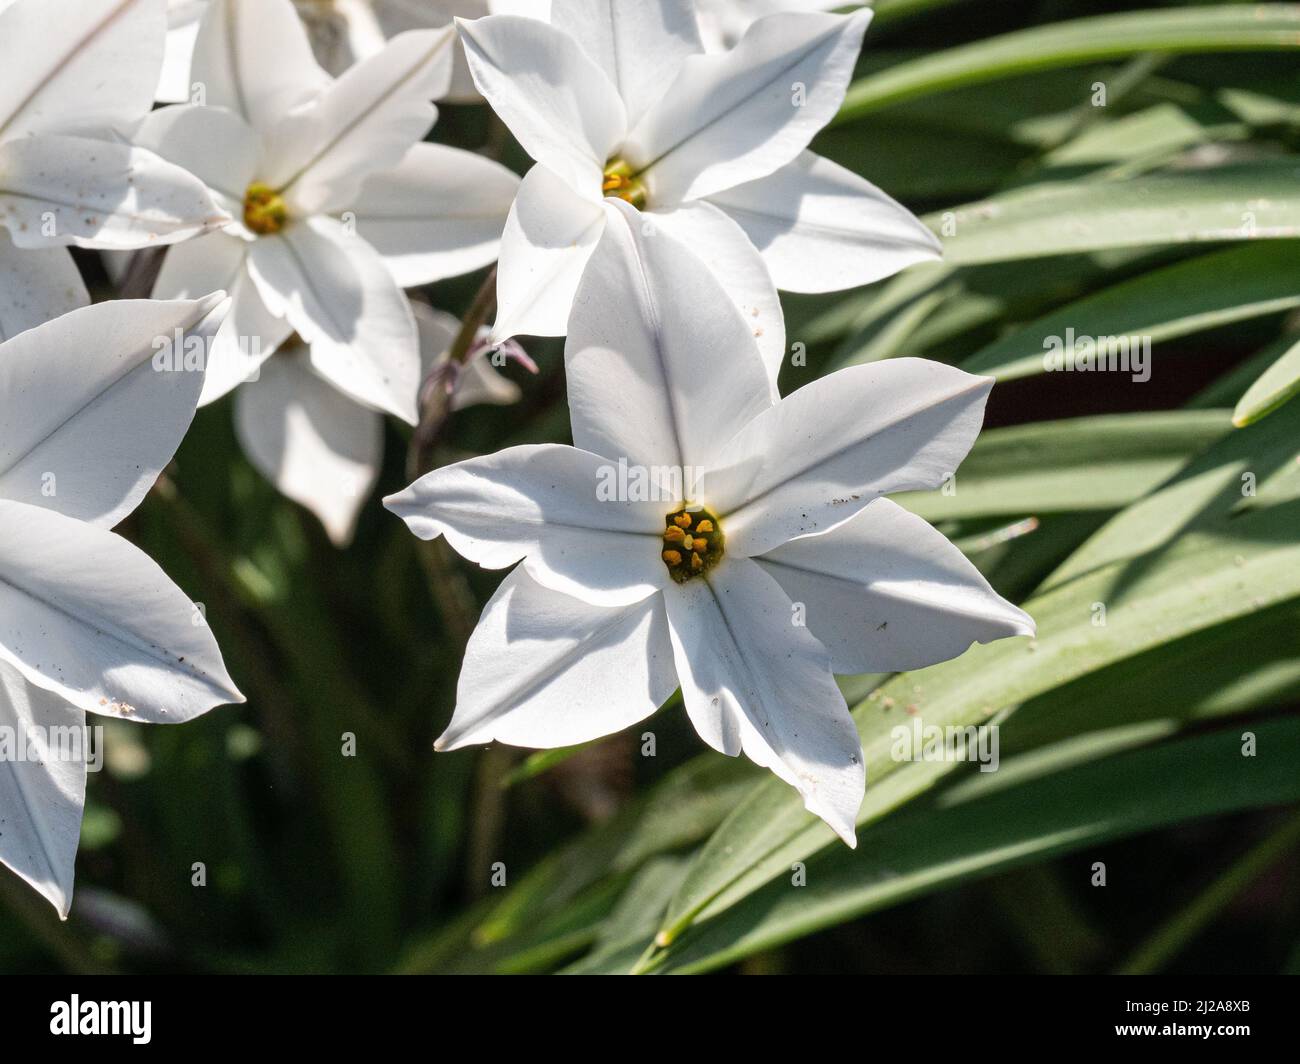 A close up of the clear white star shaped flowers of the early spring bulb Ipheion 'Alberto Castillo' Stock Photo